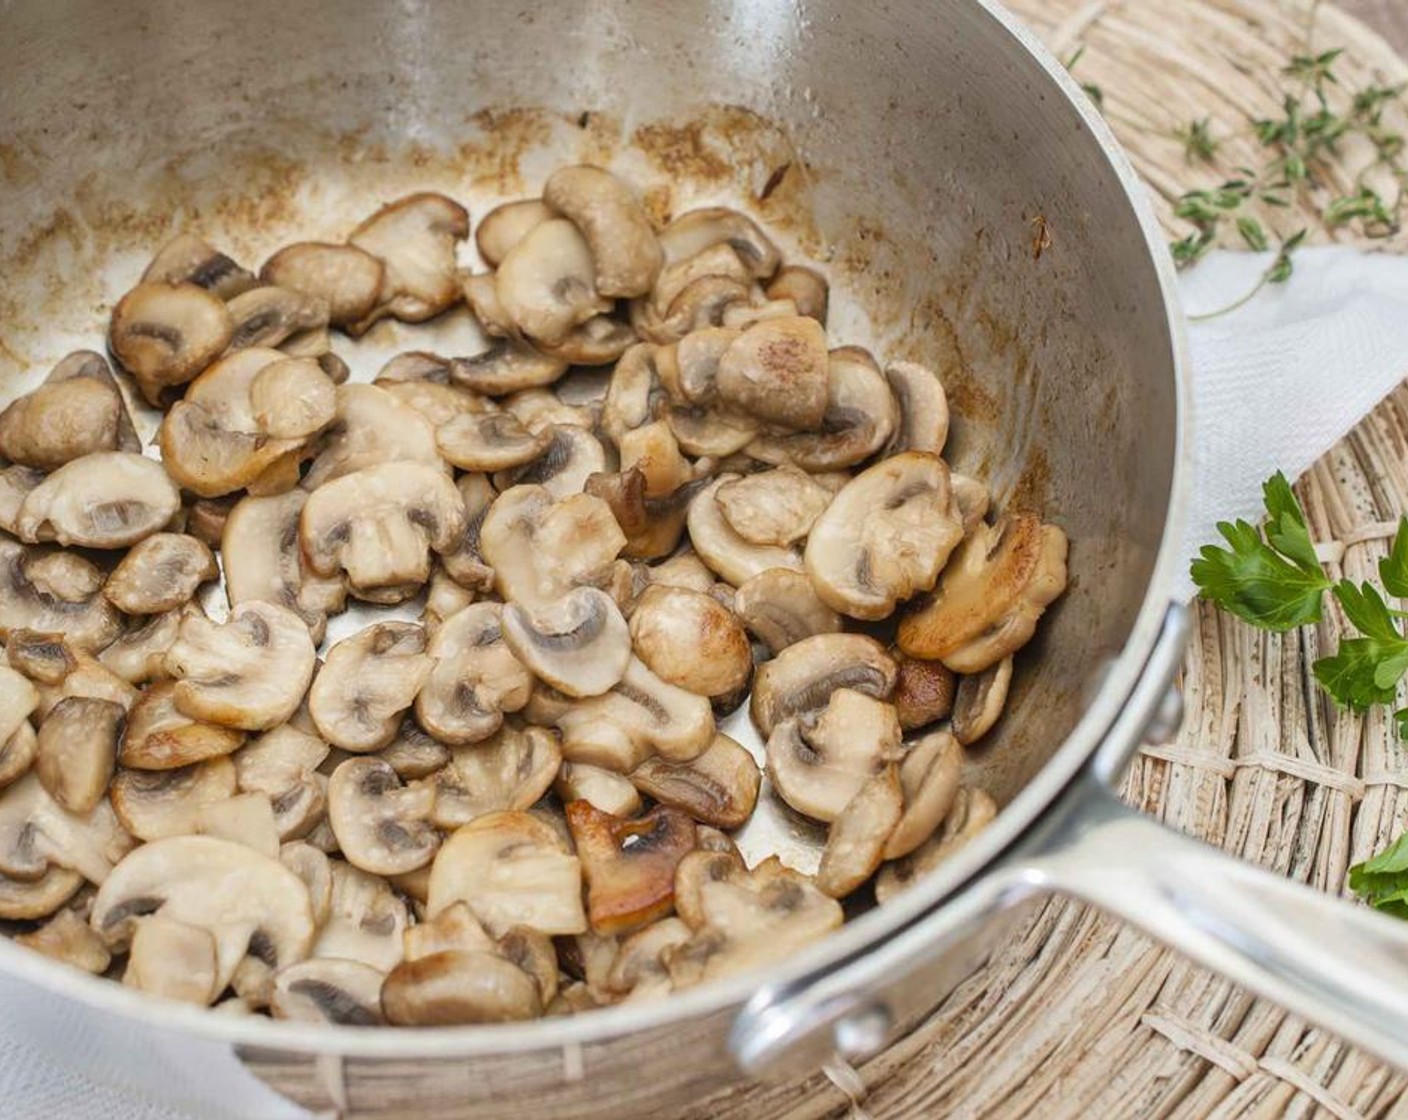 step 2 Add White Mushrooms (2 1/3 cups) and stir to coat in butter. Cook until mushrooms are browned and liquid has cooked out, stirring only once or twice, about 5-7 minutes.